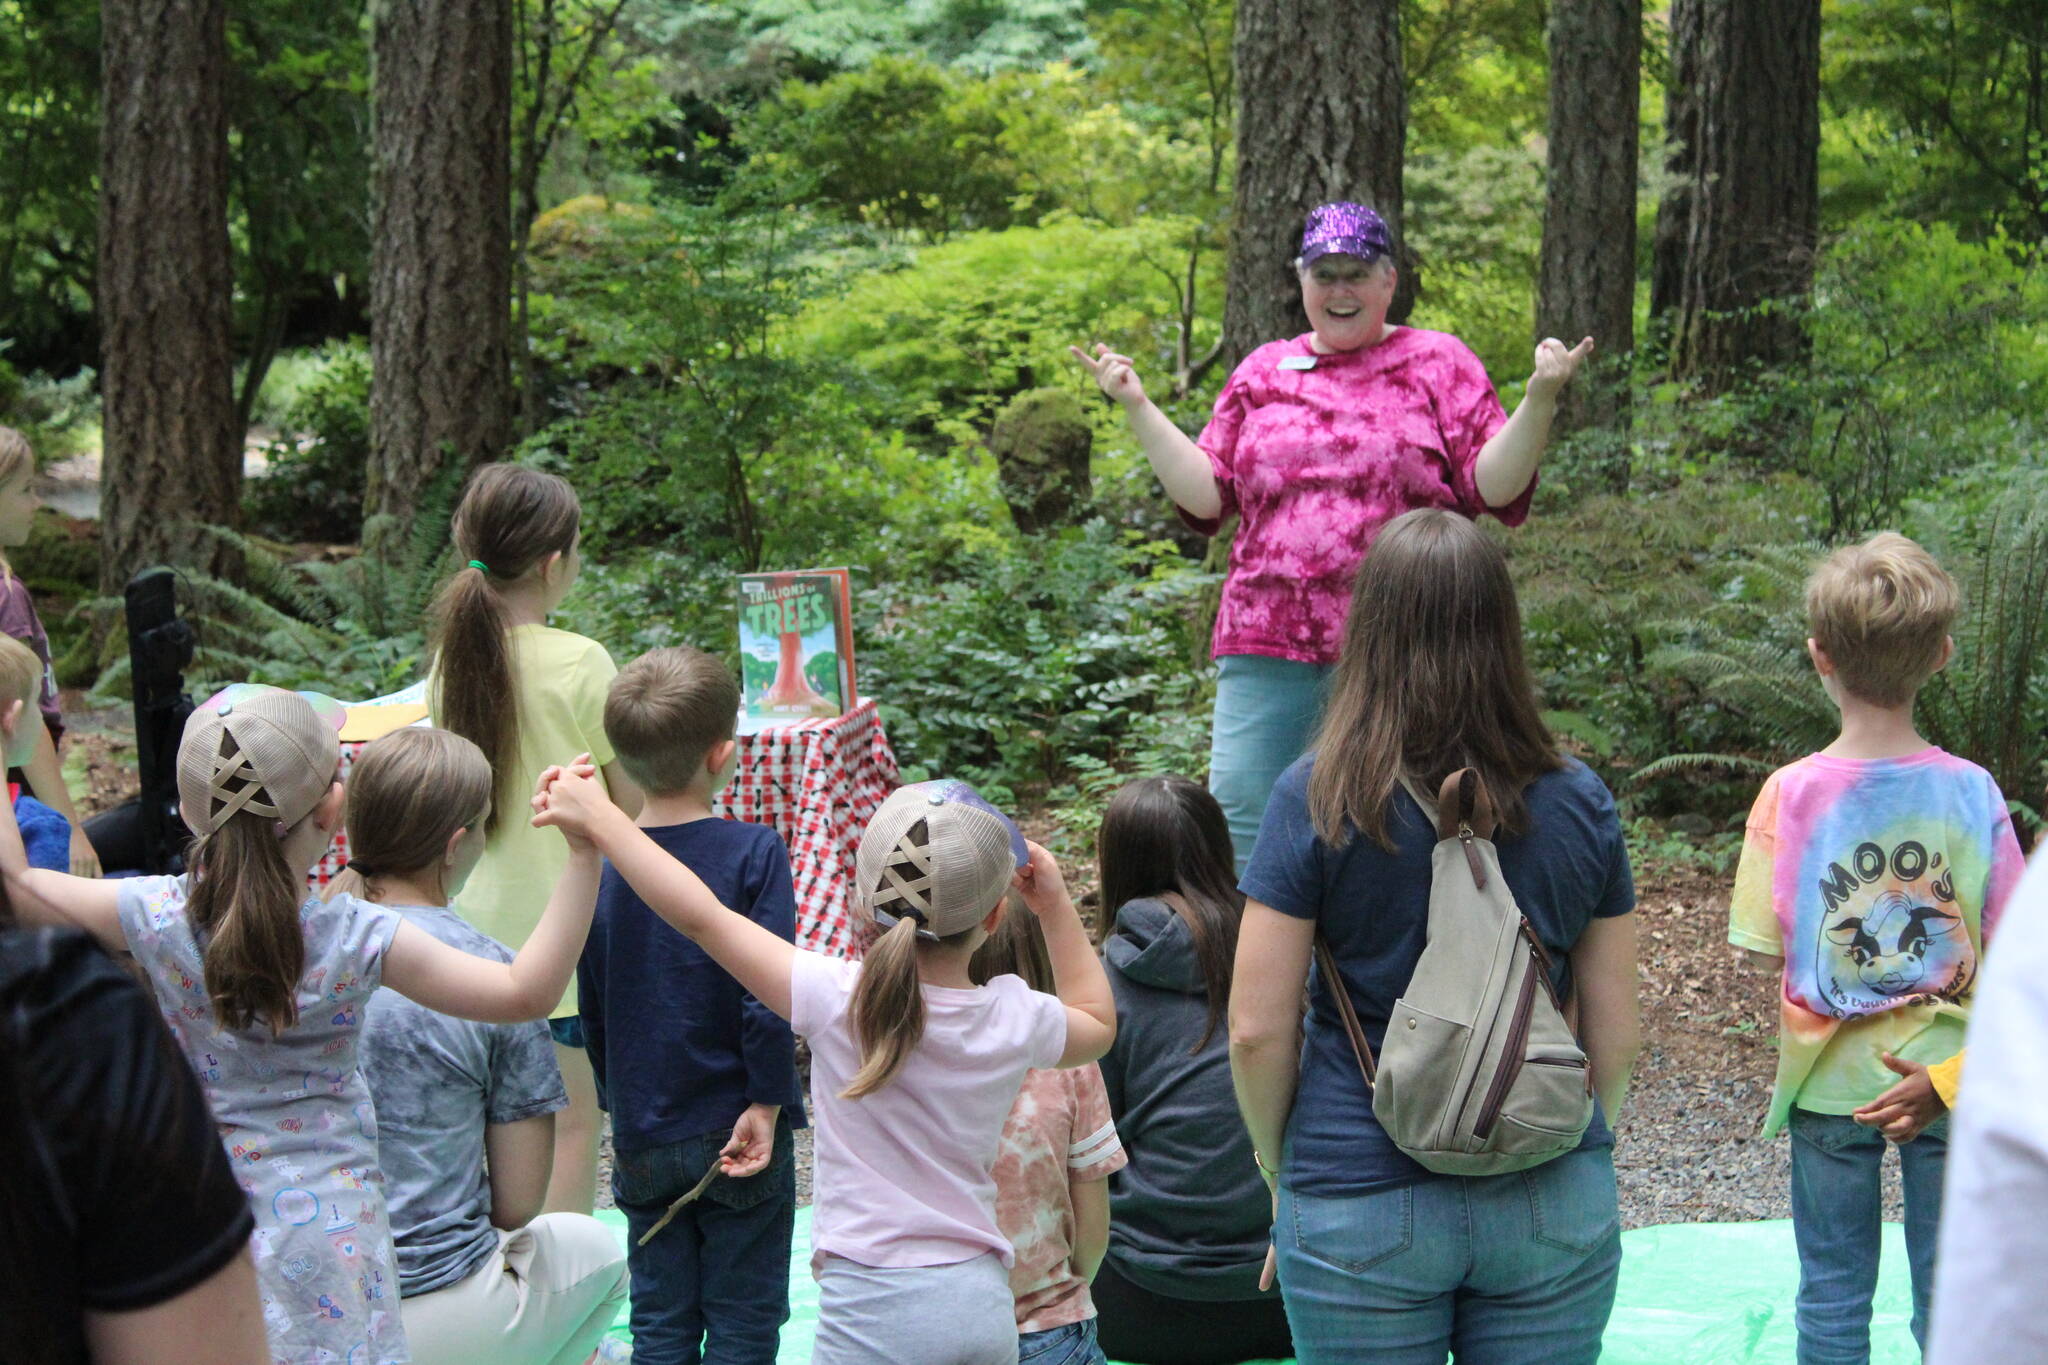 Chastain leads the children in a song between books during the Tree Tour. Photo by Bailey Jo Josie/Sound Publishing.